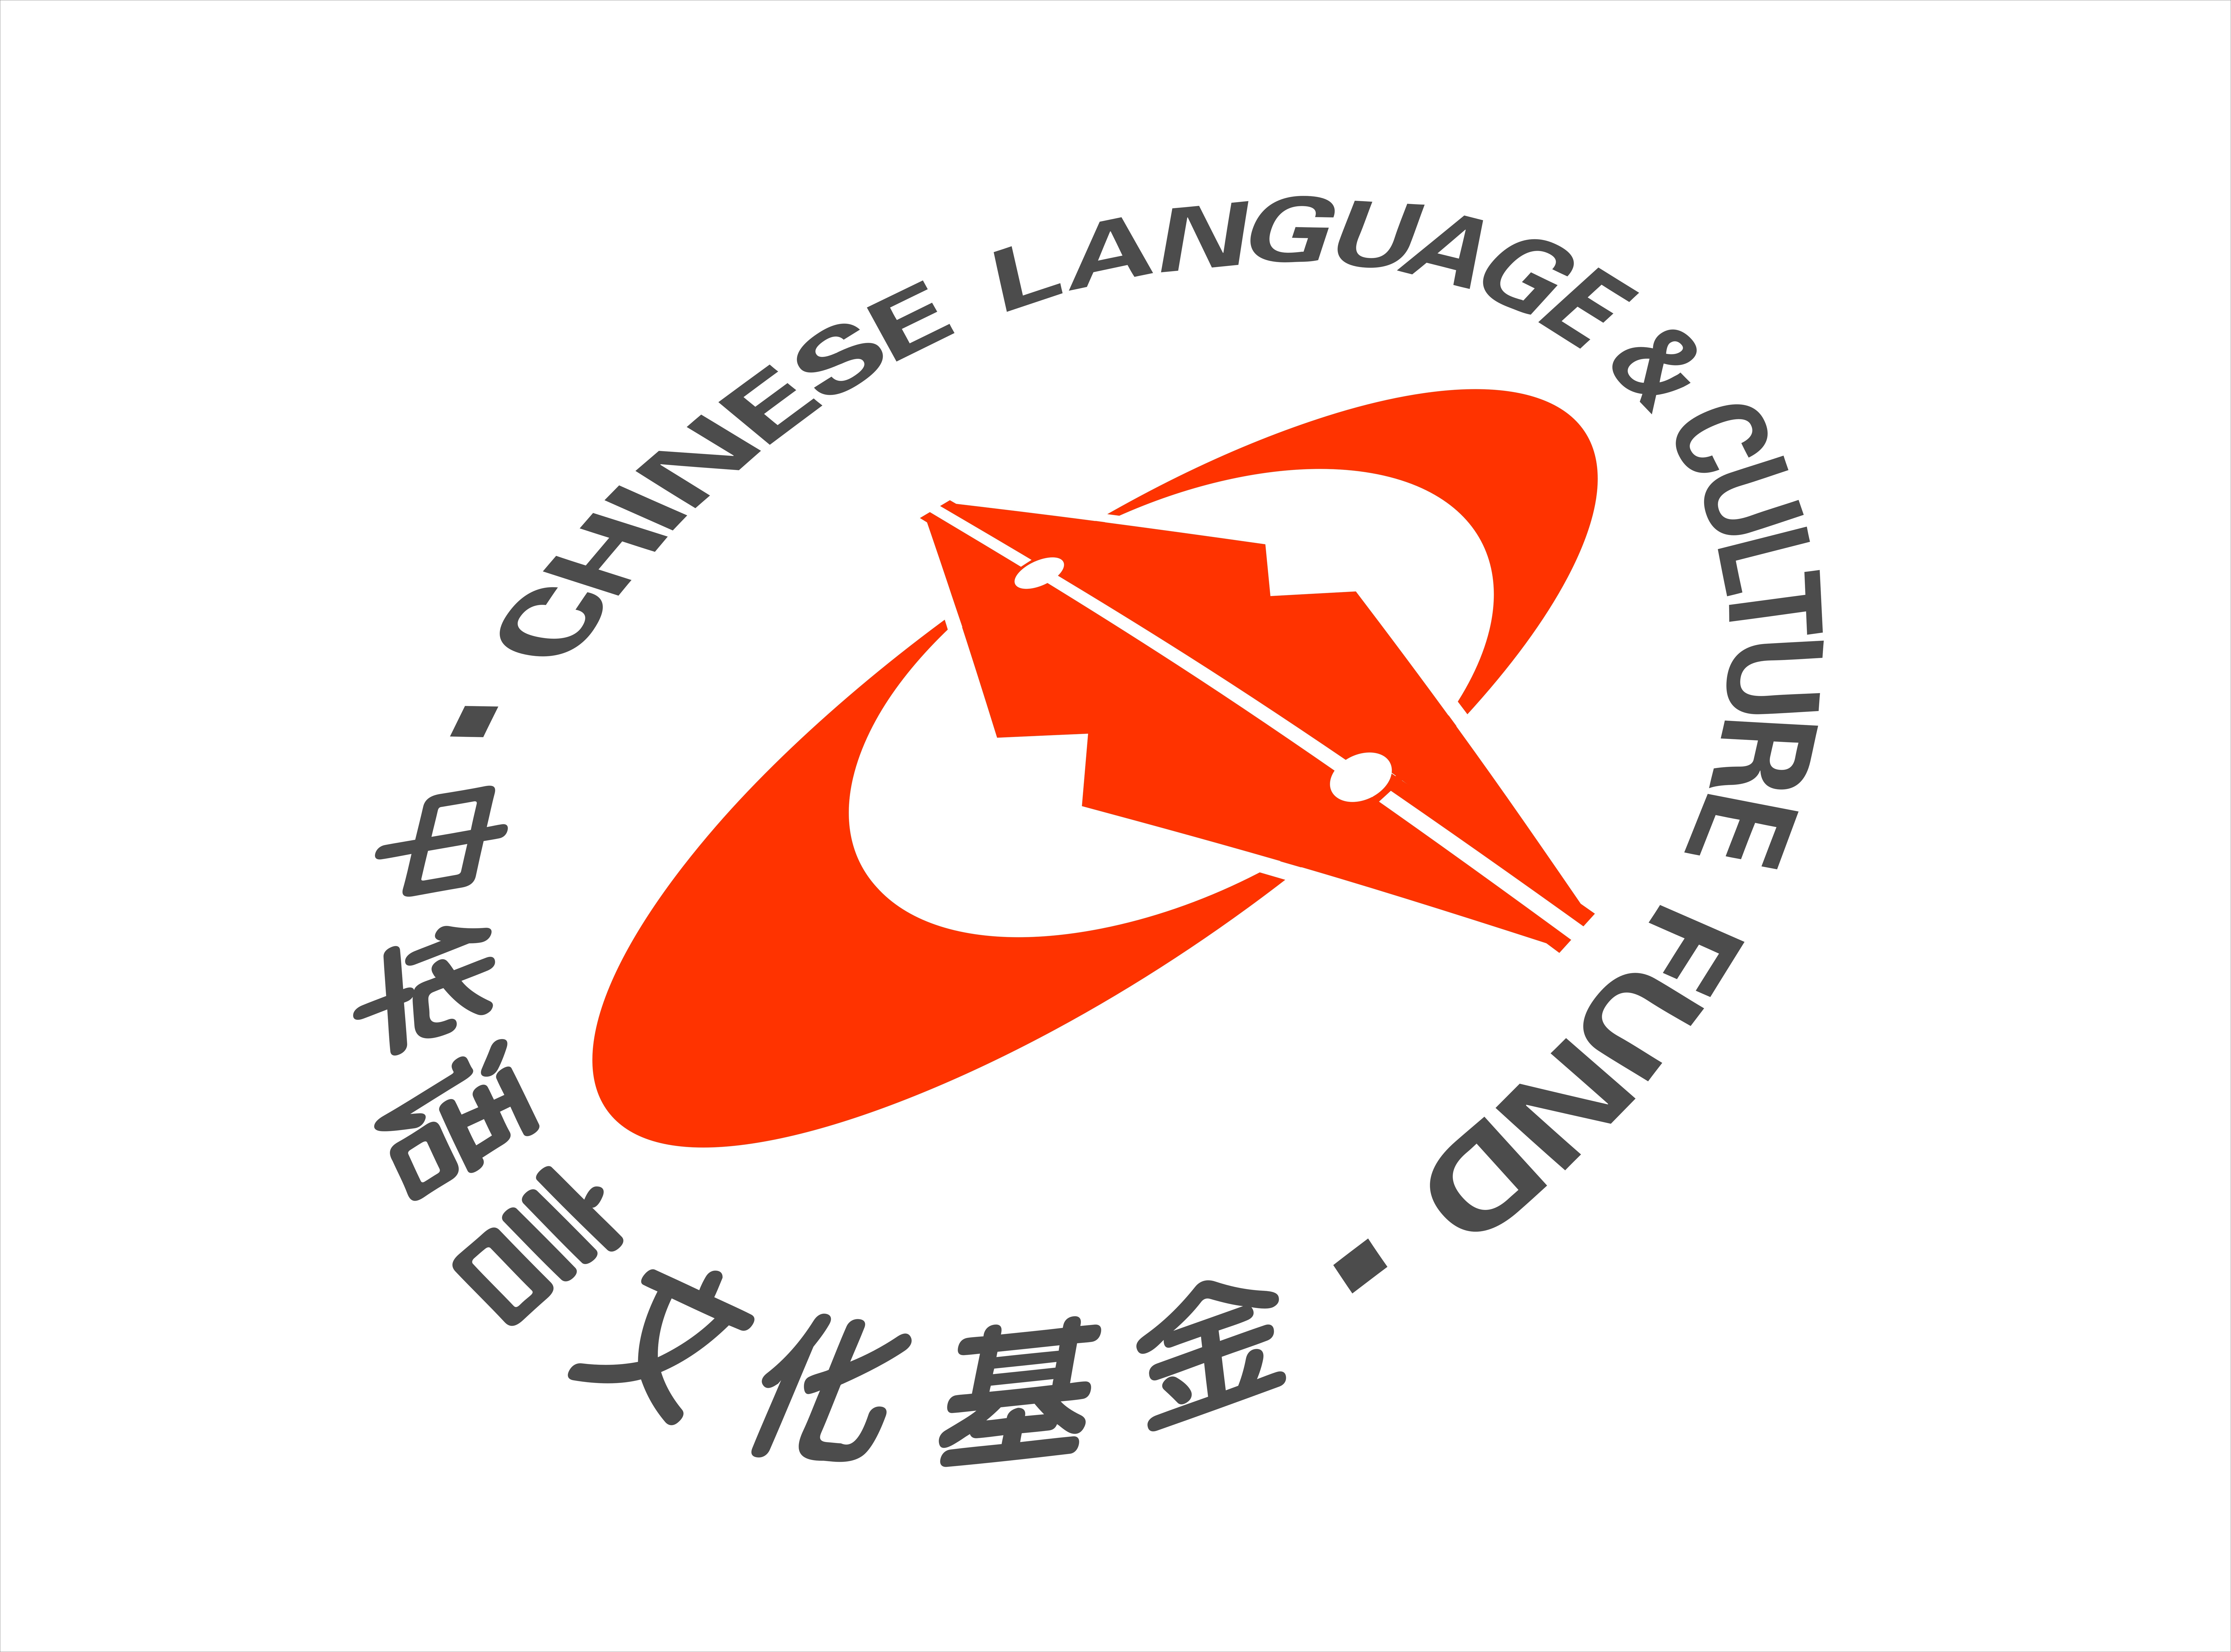 CHINESE LANGUAGE AND CULTURE FUND (CLCF)